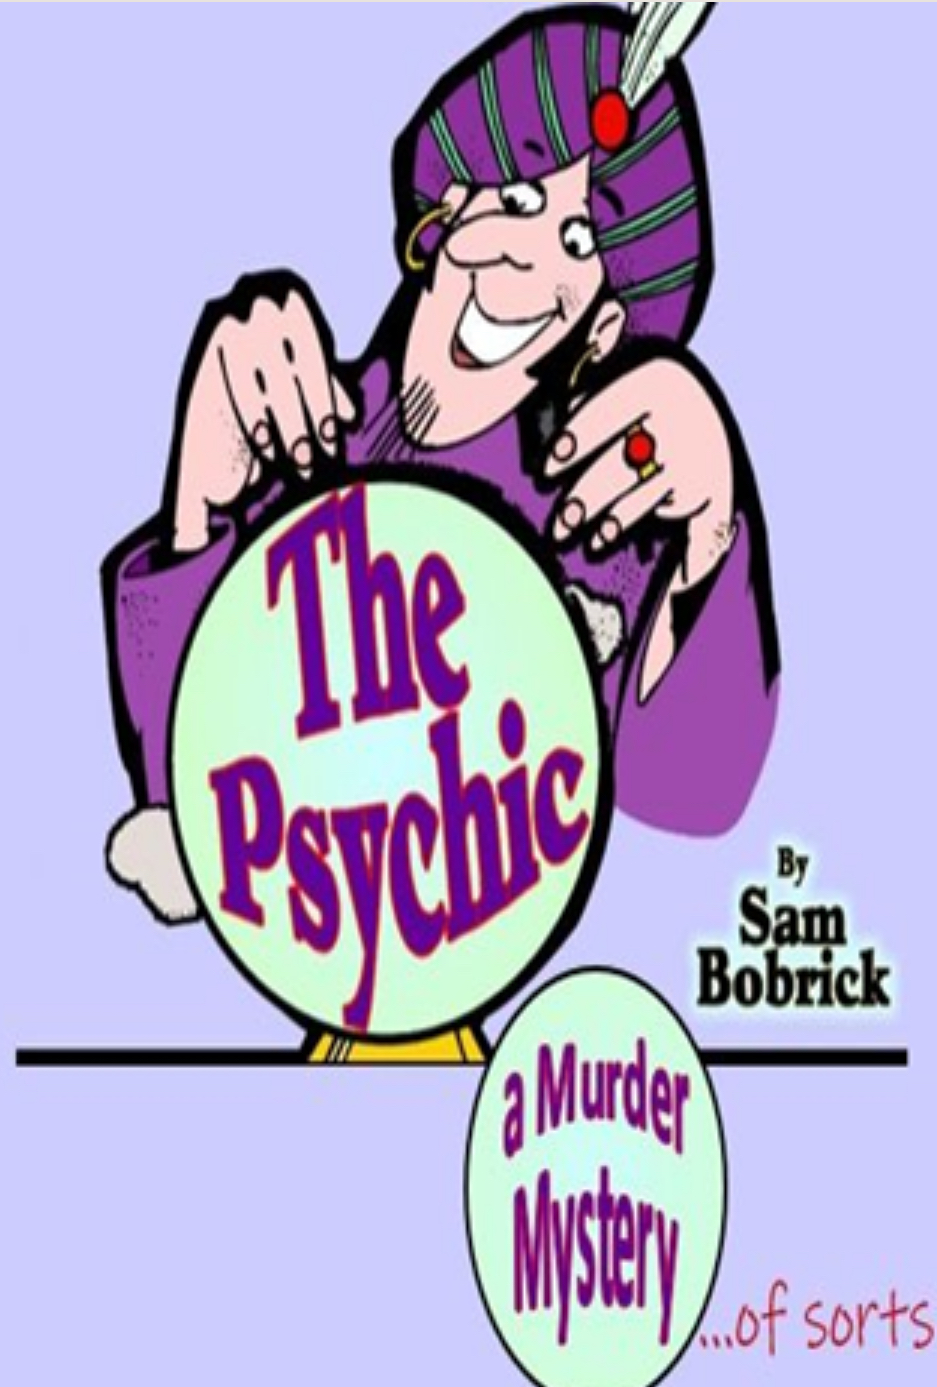 A flyer for "The Psychic," showing a clip art magician with a crystal ball.